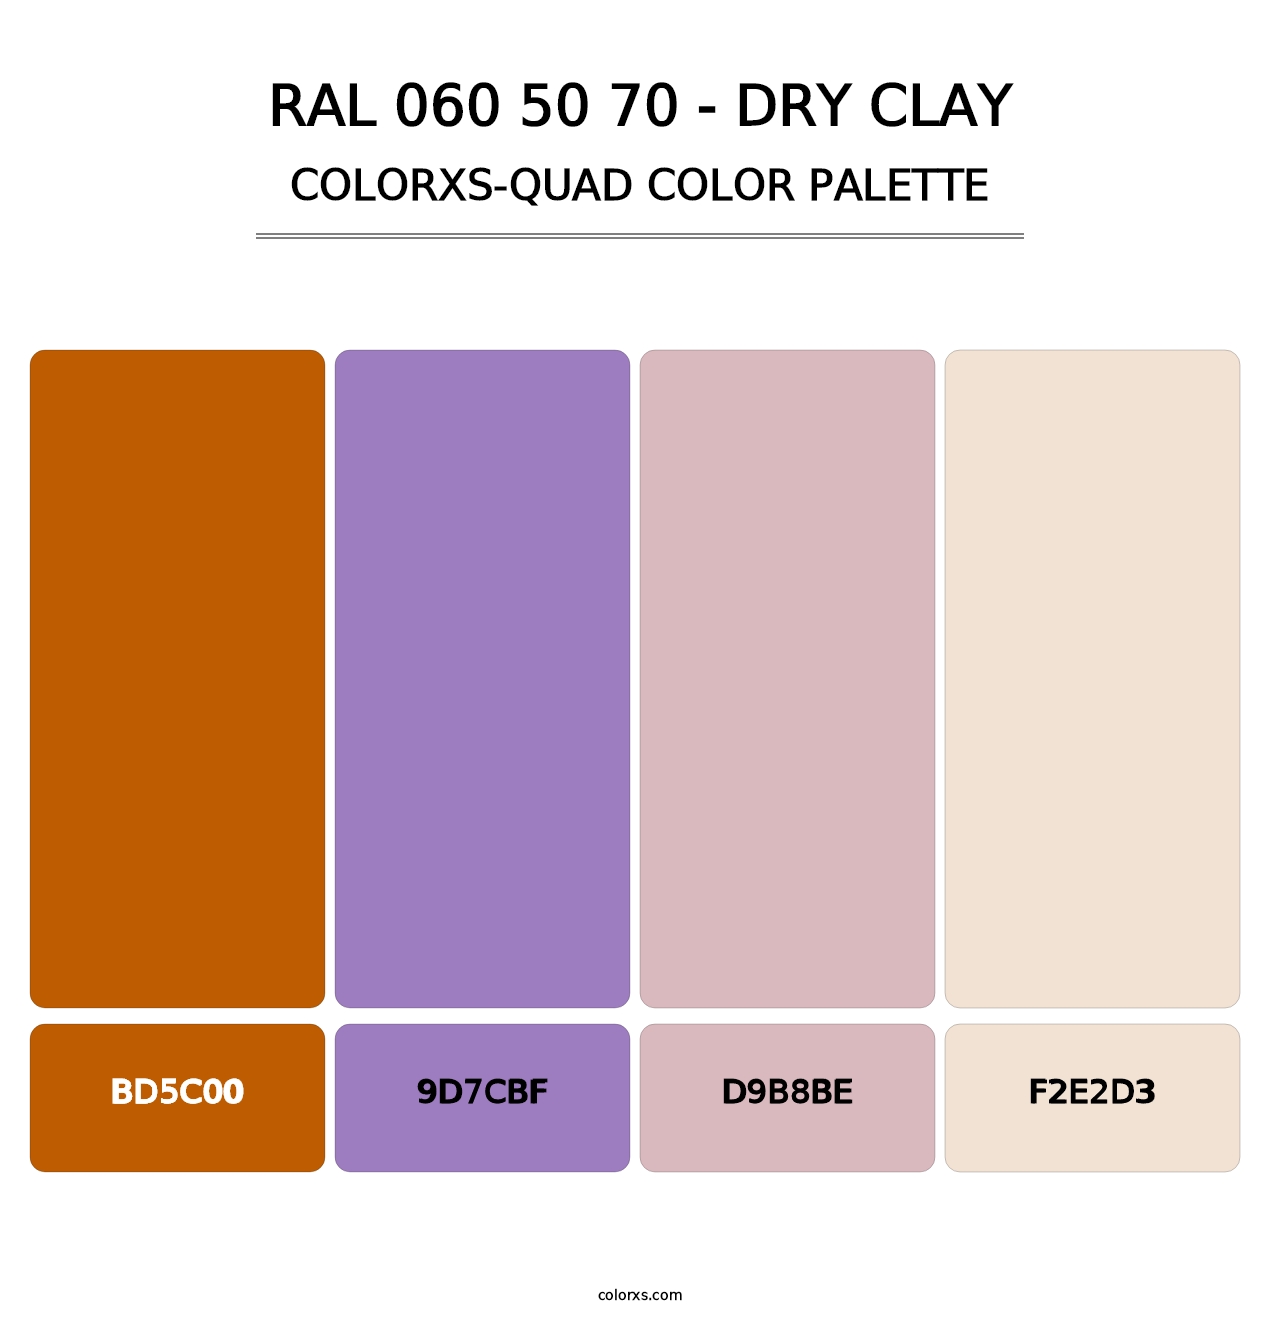 RAL 060 50 70 - Dry Clay - Colorxs Quad Palette